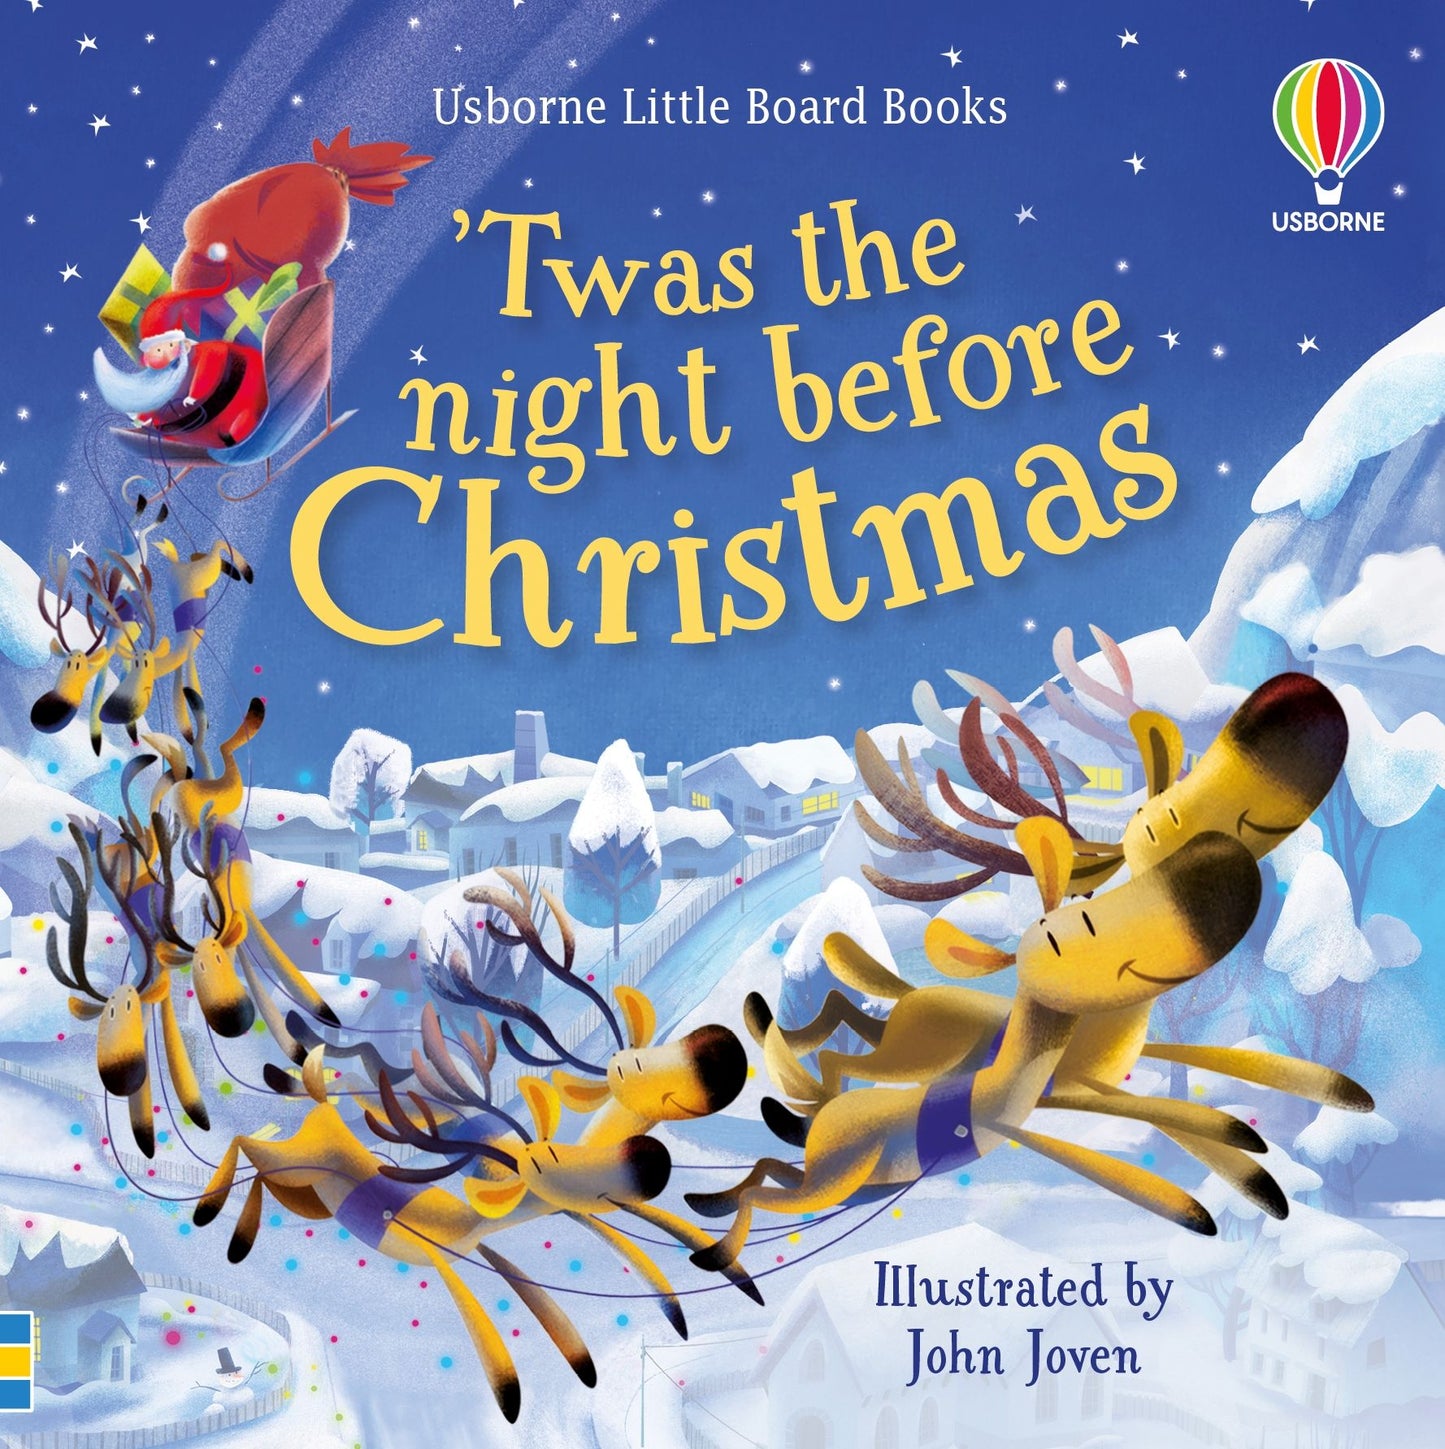 Little Board Books - 'Twas the Night Before Christmas